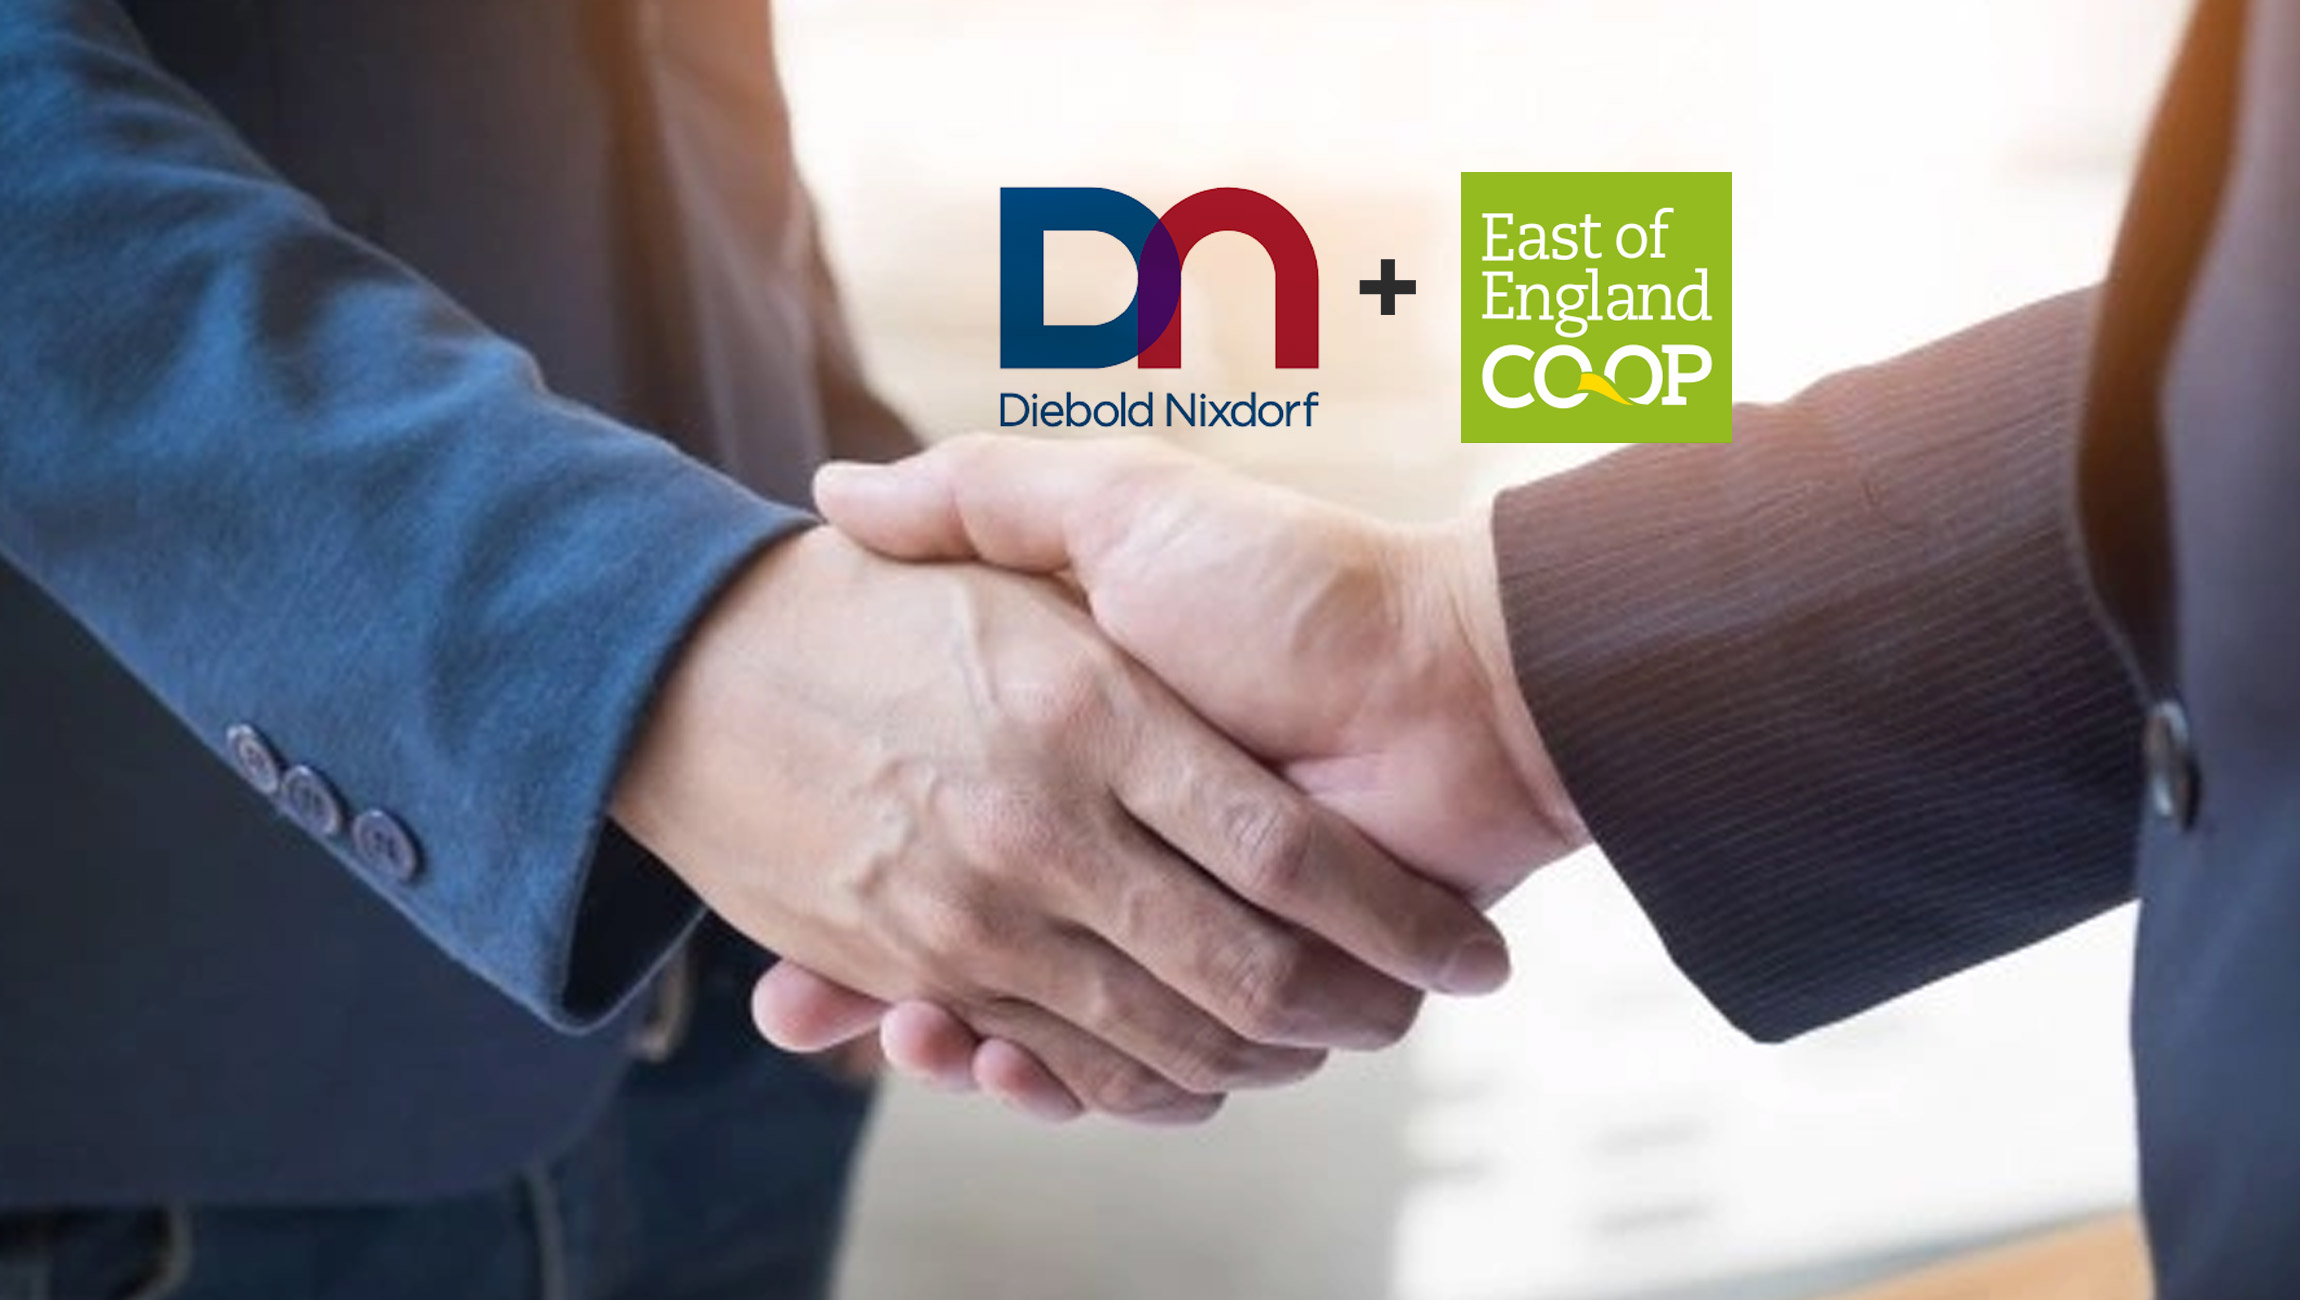 Diebold Nixdorf Expands Partnership with East of England Co-op to Deploy Latest Retail Self-Service Solutions Designed to Enhance Shopping Experience